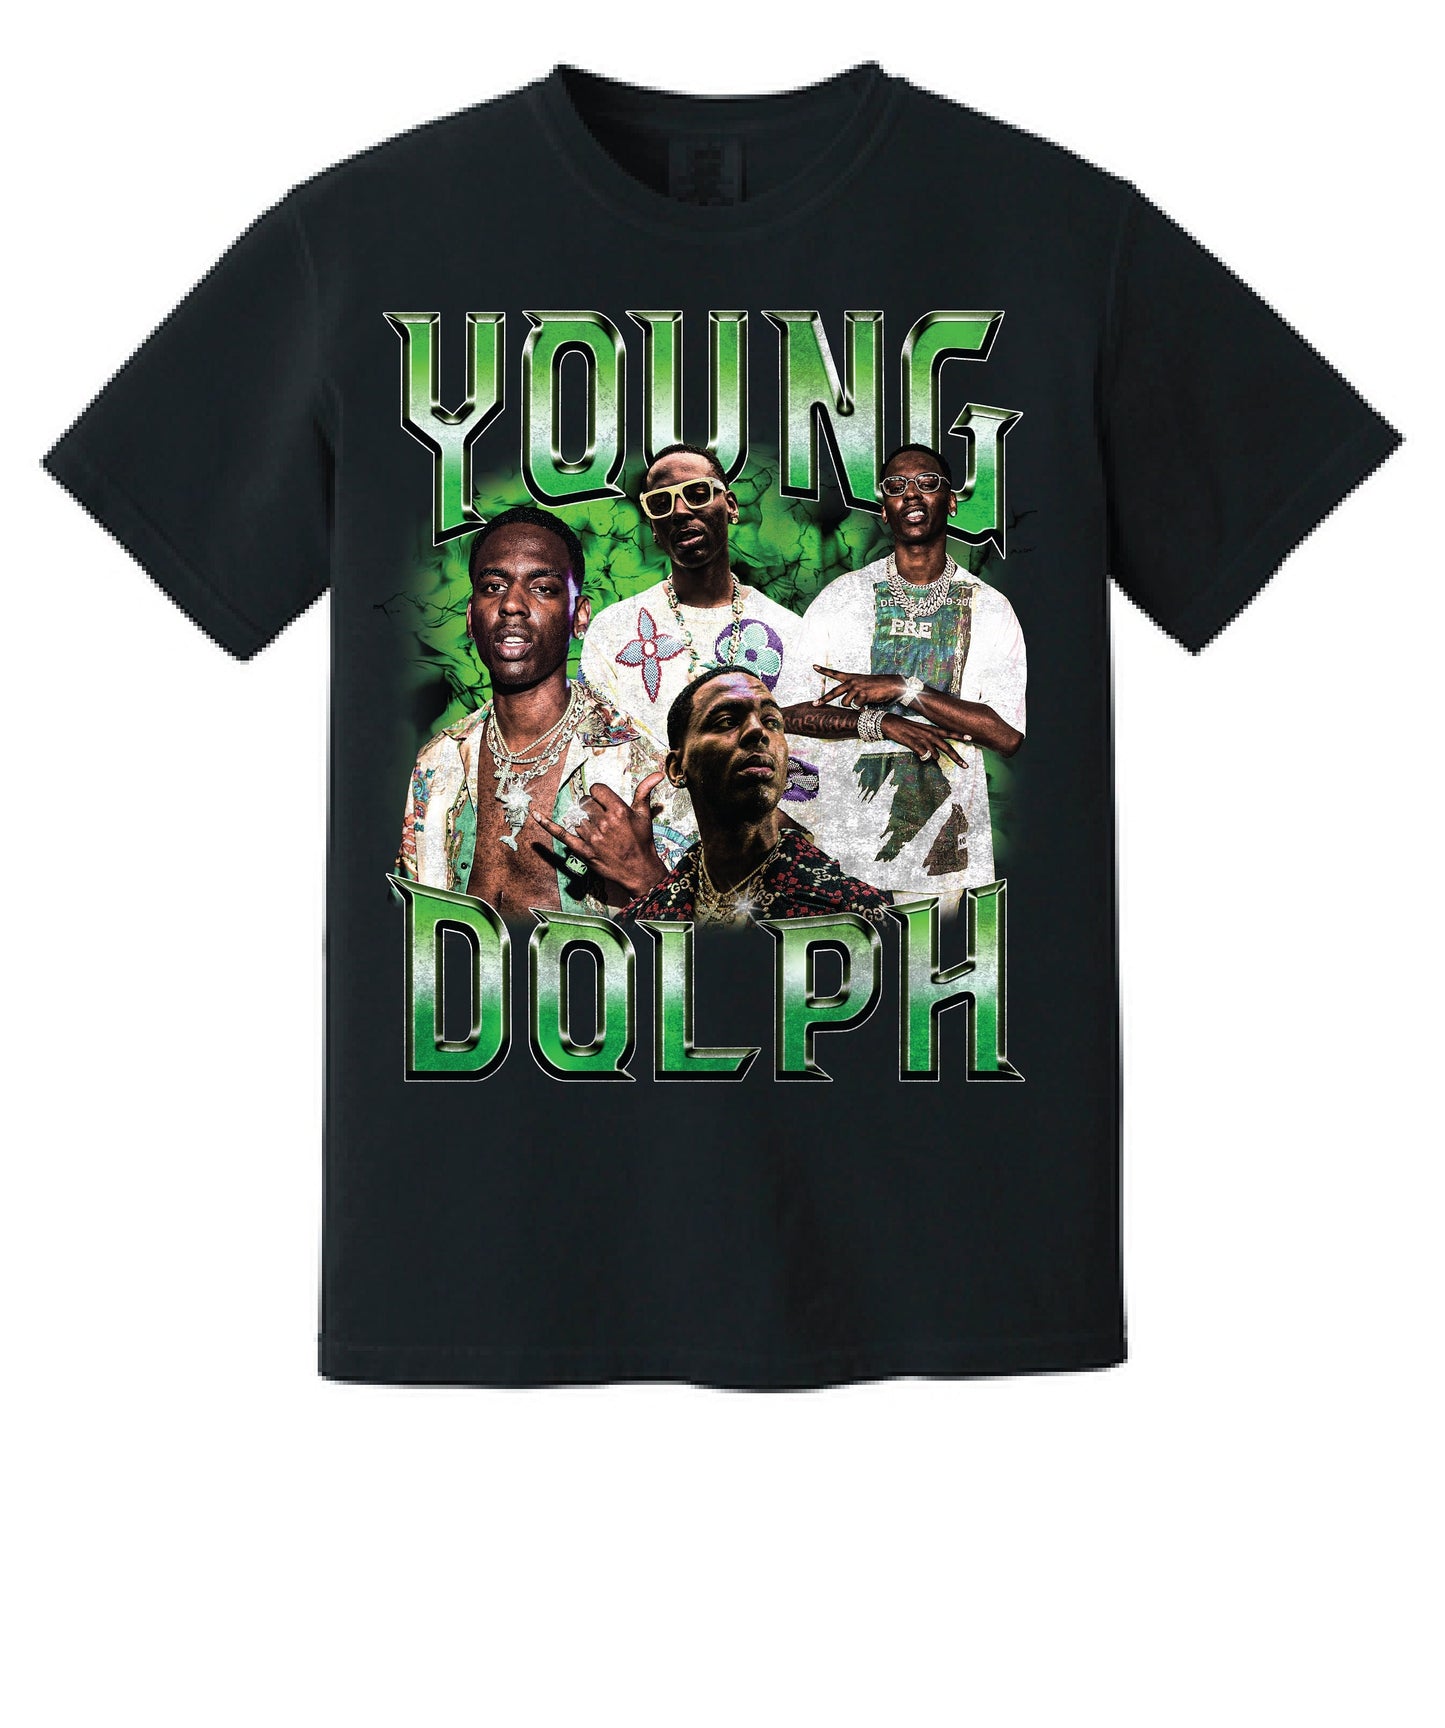 RIP Young Dolph Vintage 90's Bootleg T-shirt - Honoring a Hip-Hop Legend